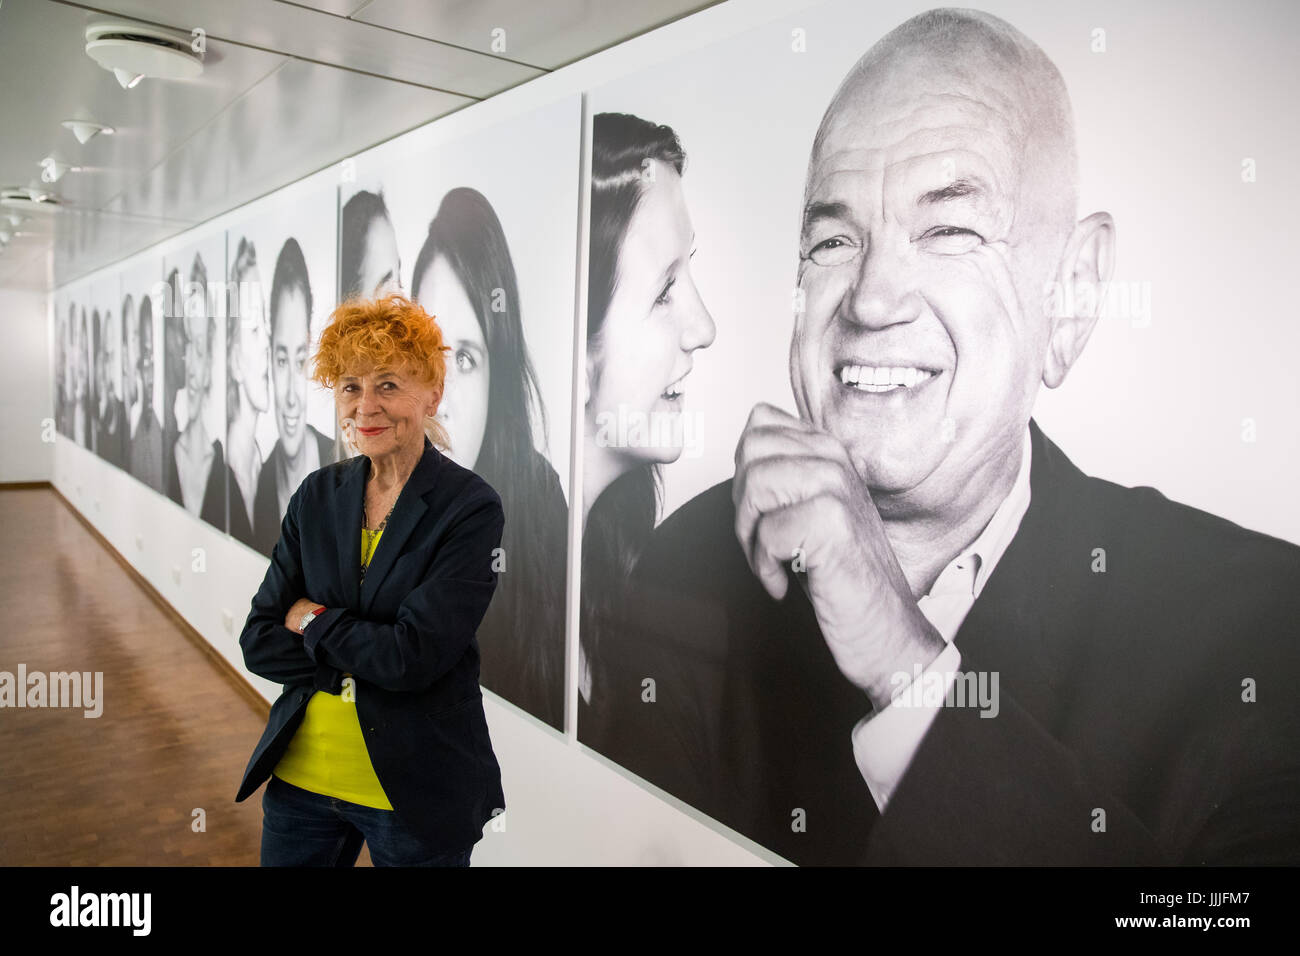 Photographer Herlinde Koelbl standing in front of her exhibits in the exhibition 'Stille Post (lit. Silent Post, name of the children's game known as, among others, Chinese whispers). Hearing and understanding' in the Museum for Communication in Nuremberg, Germany, 20 July 2017. The project by the photographer from Munich consists of black-and-white pictures of men, women and children from 16 countries from all five continents and shows them as 28 different couples whispering to each other a message which remains hidden from the viewer. The exhibition will be open until 10 September 2017. Phot Stock Photo